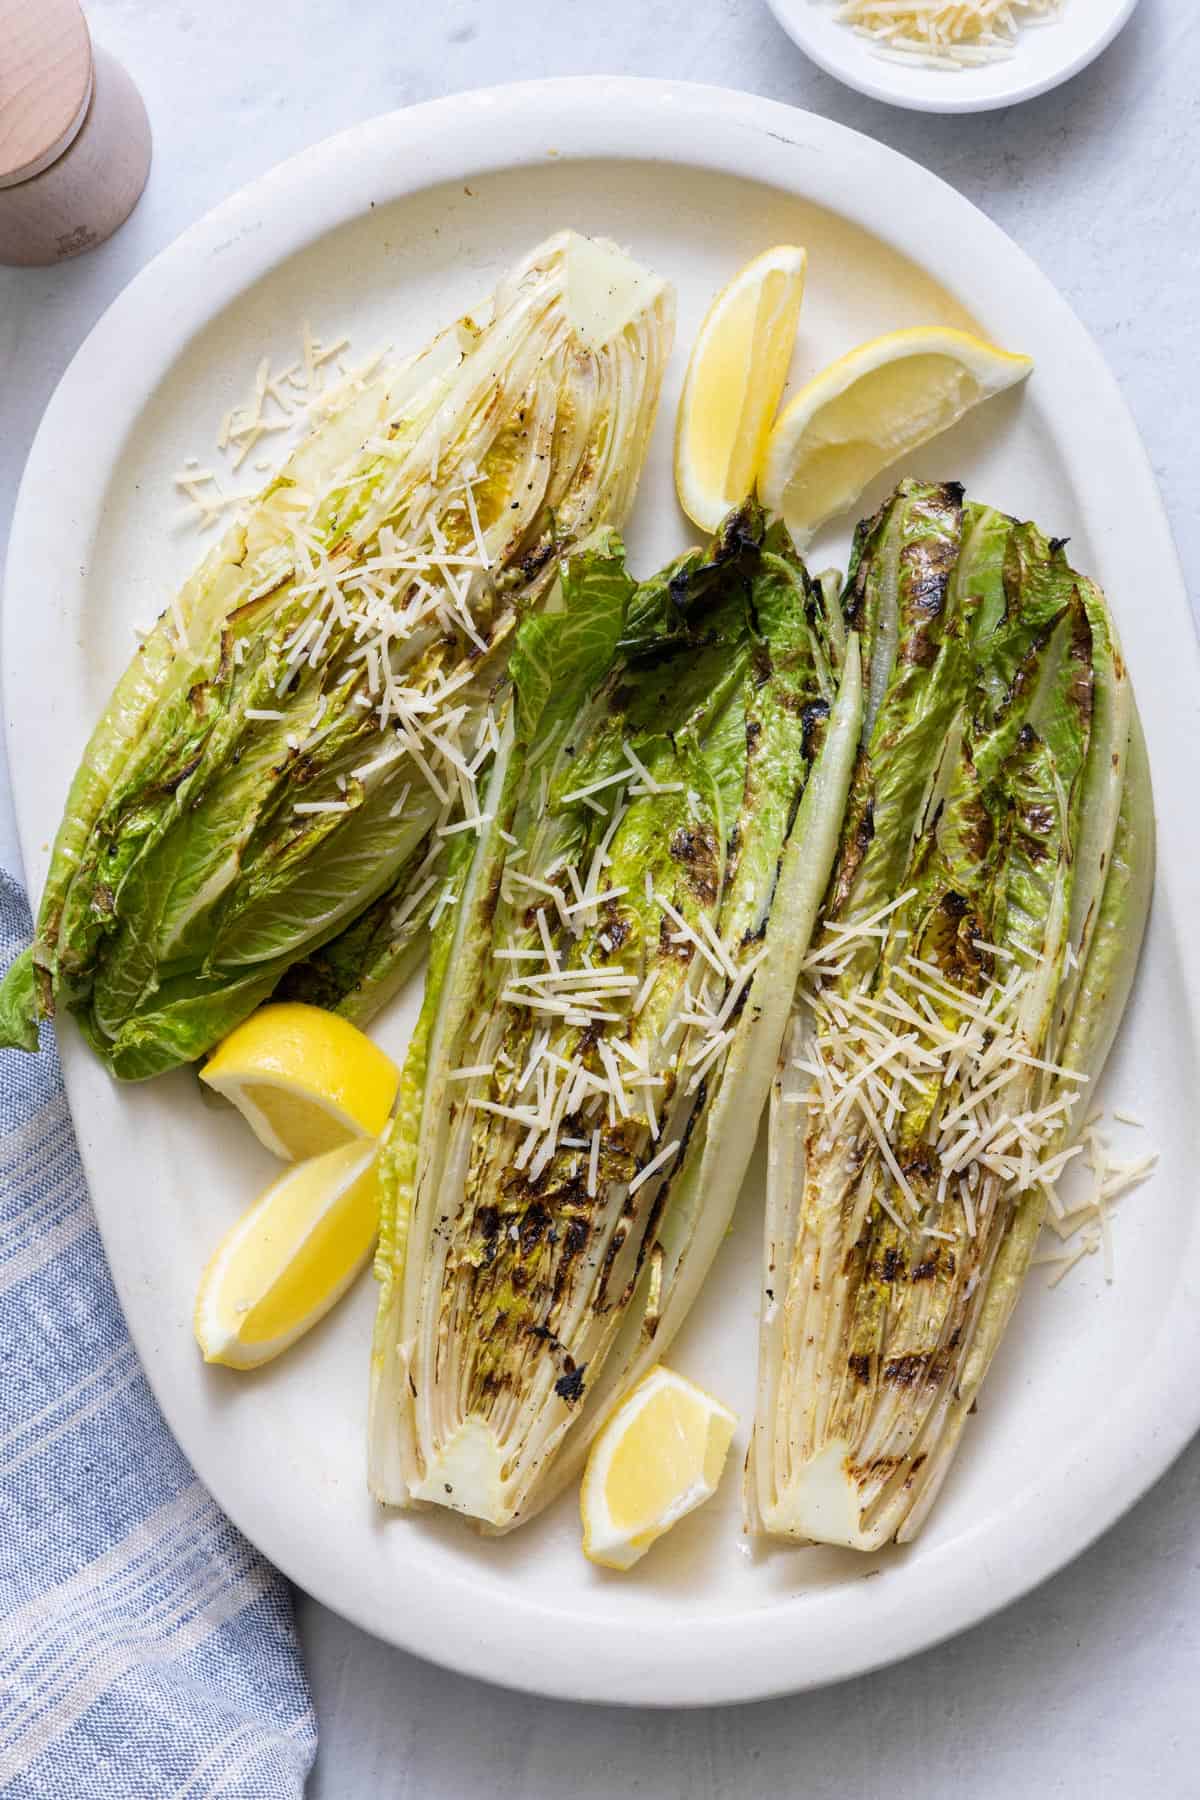 Large white oval platter with 3 halved grilled romaine lettuces sprinkled with shredded parmesan and garnished with lemon wedges.